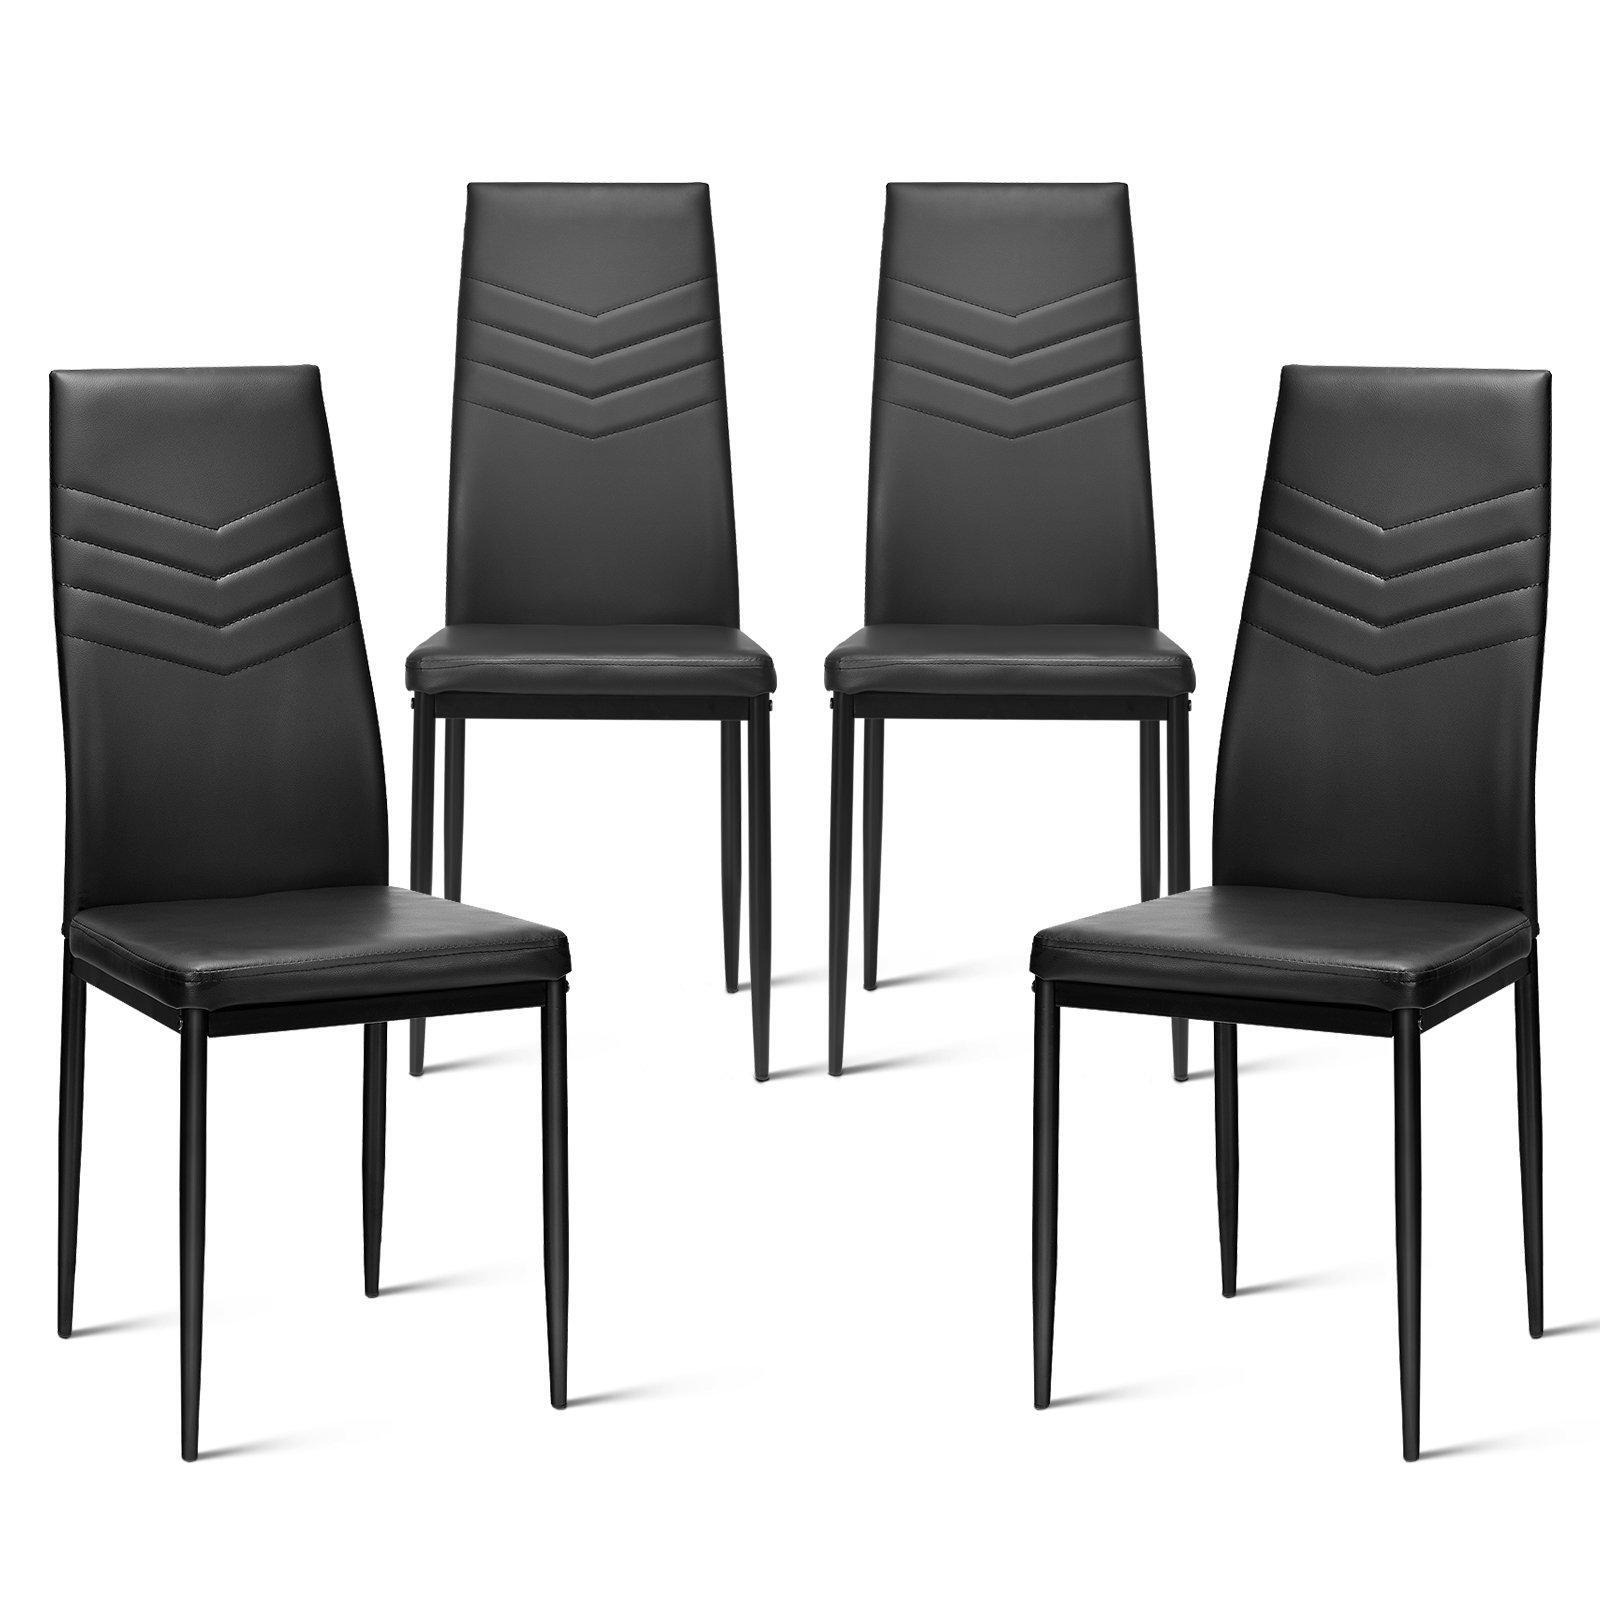 Set of 4 Dining Chairs Padded Seat High Back Armless Accent Dining Side Chairs - image 1